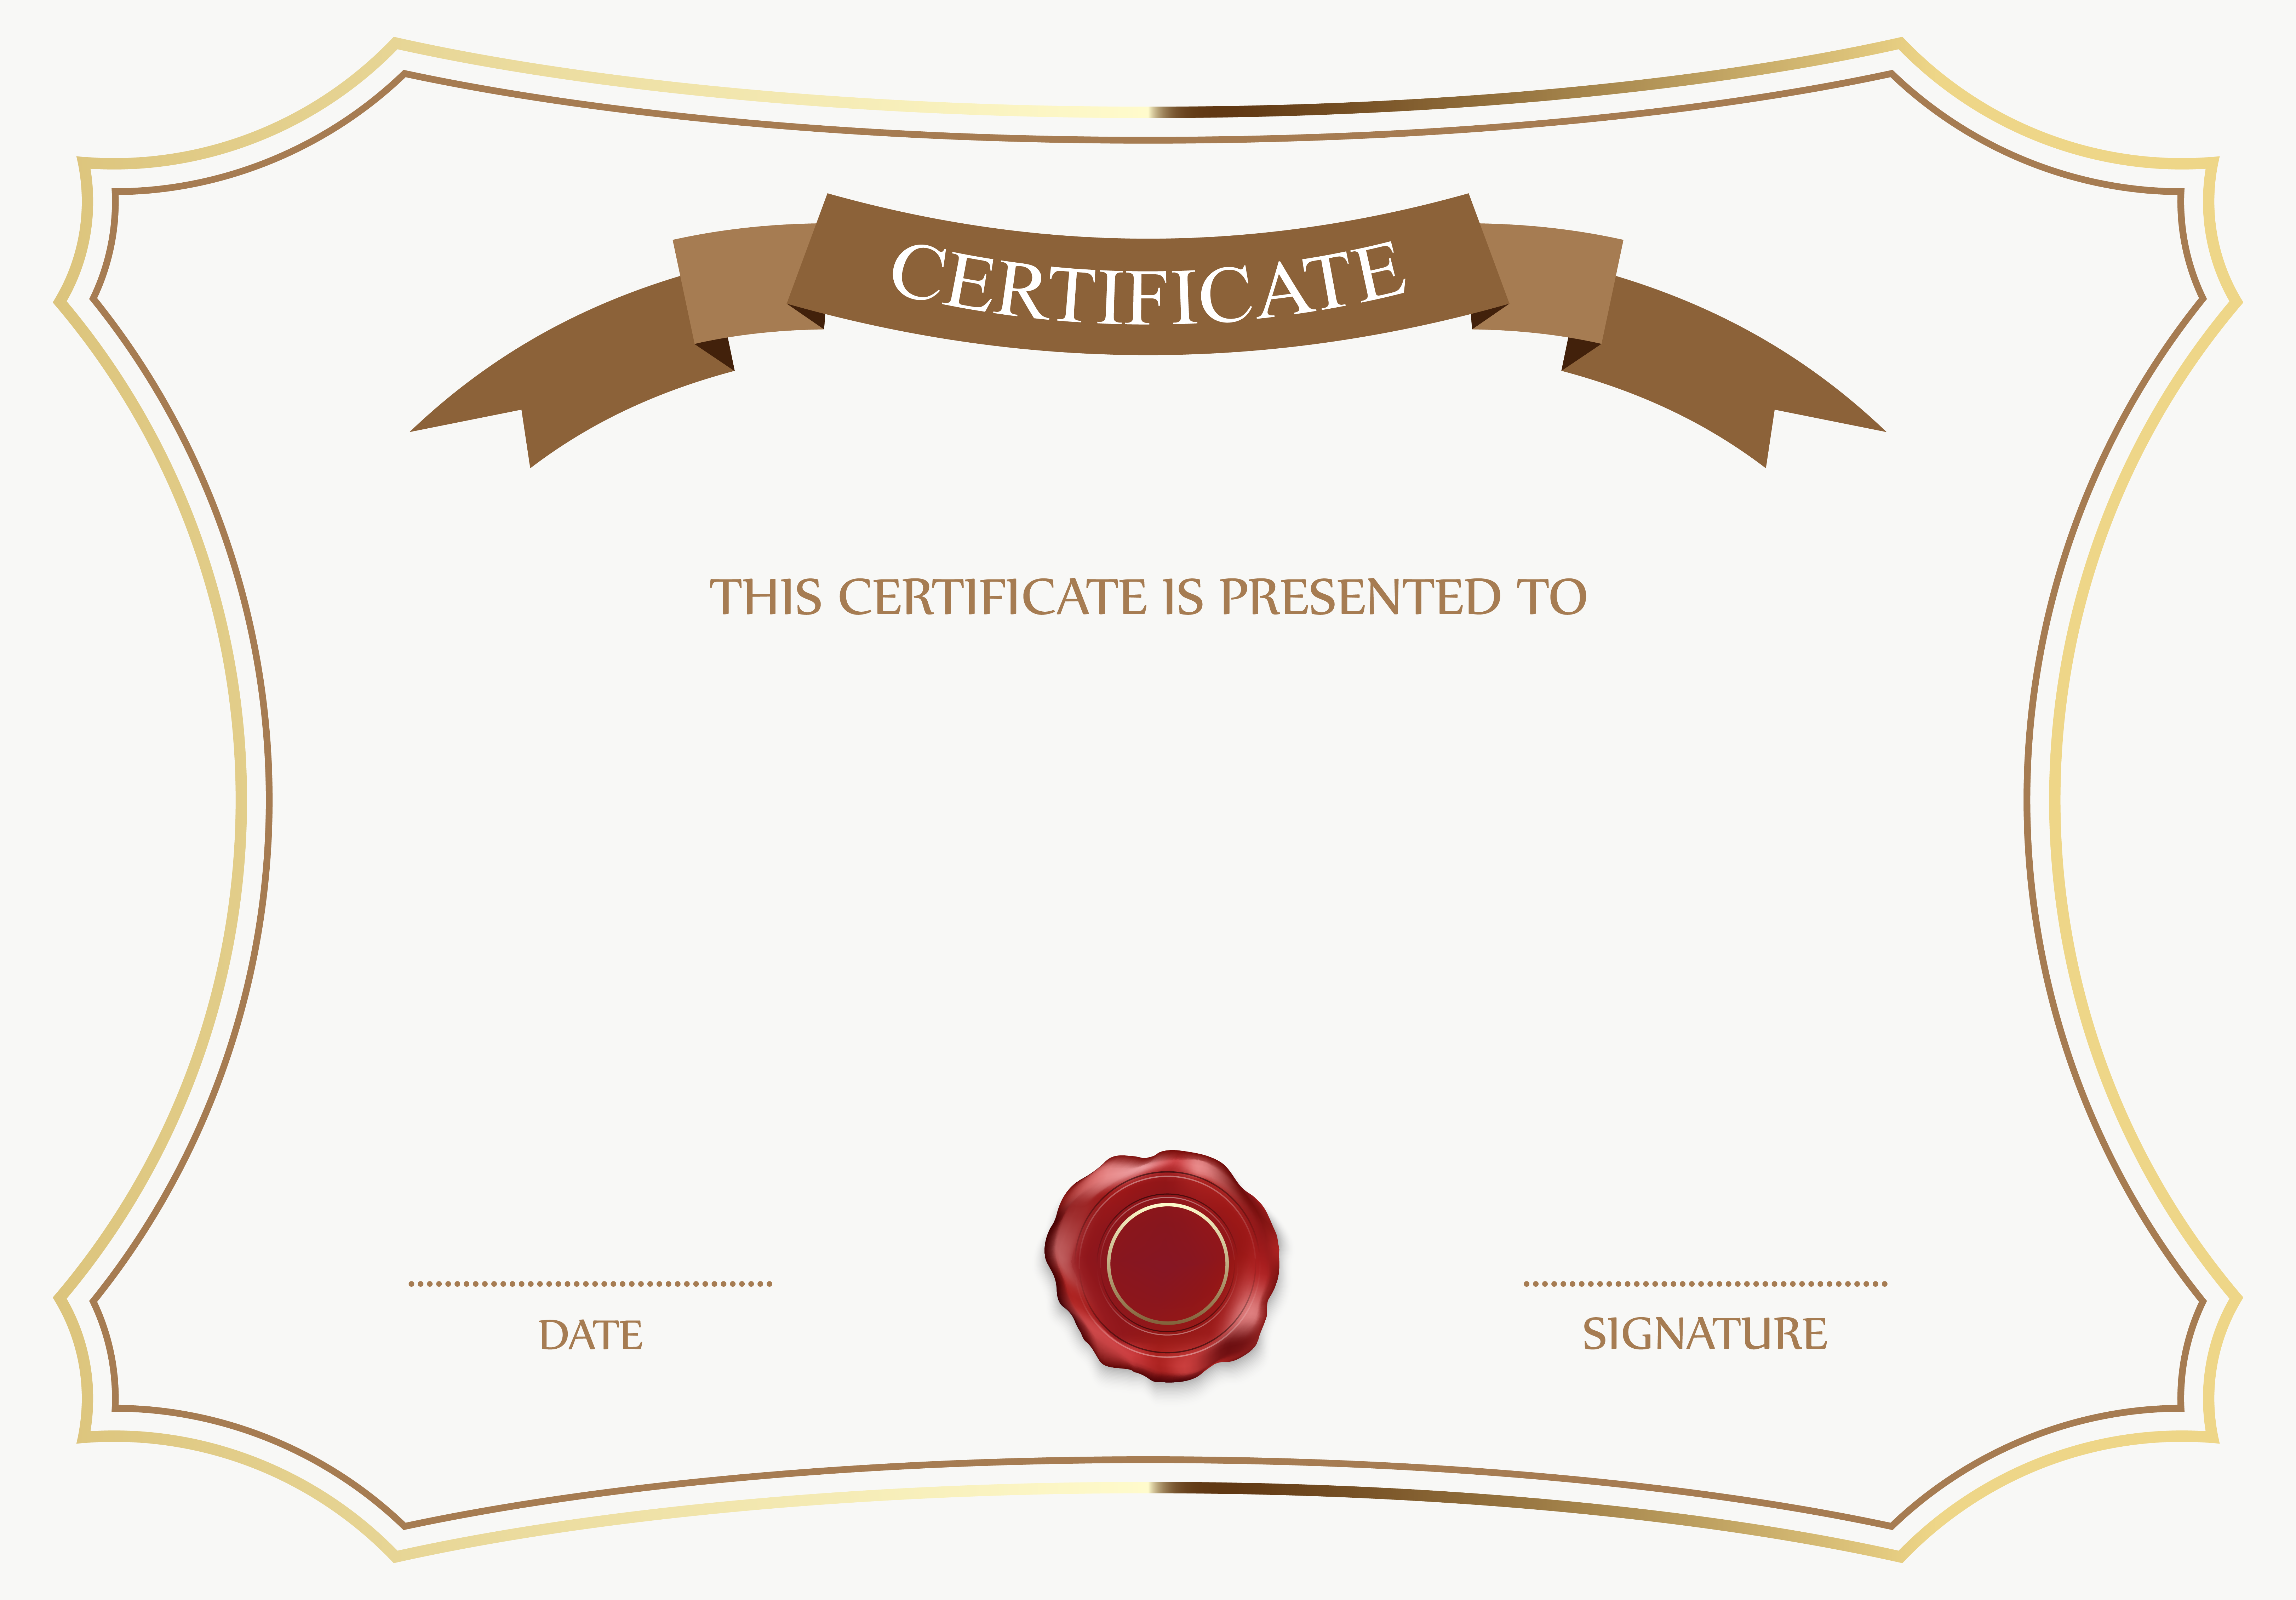 White and Brown Certificate Template PNG Image​  Gallery Intended For Love Certificate Templates